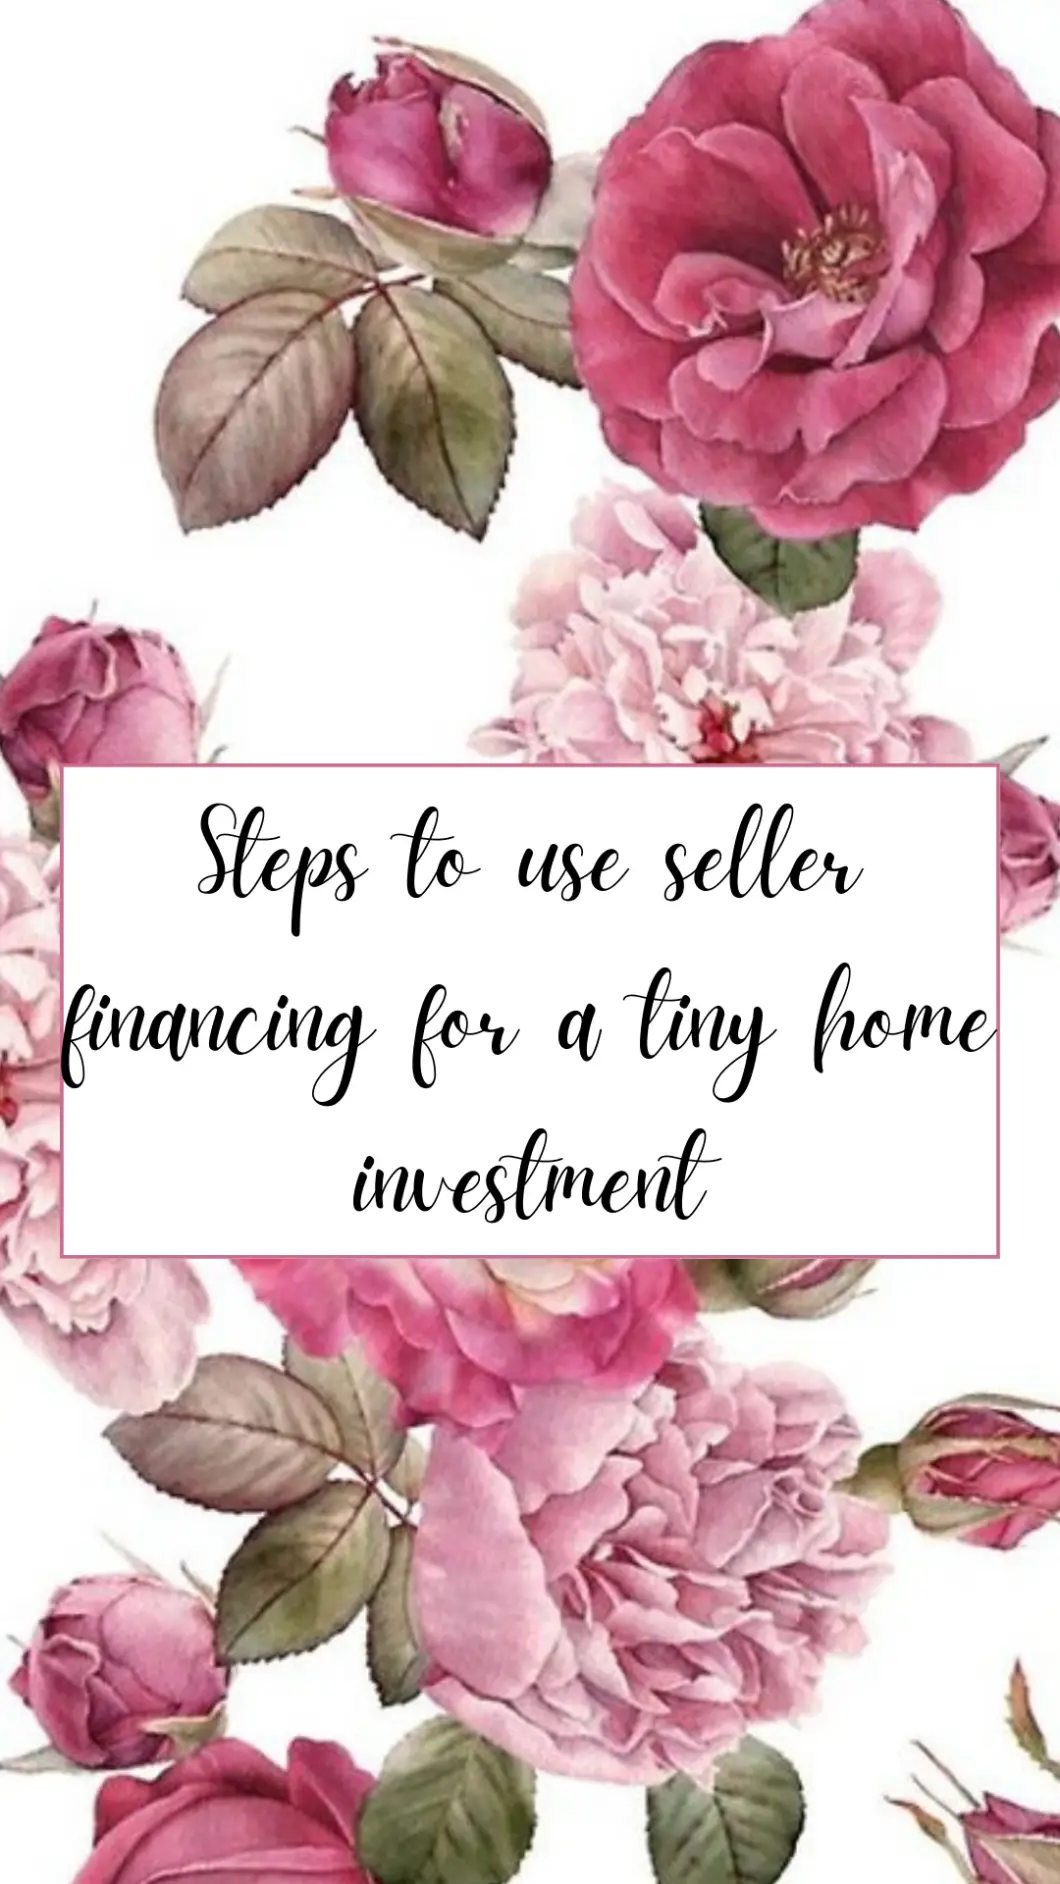 Steps to use seller financing for a tiny home investment 1060x1884